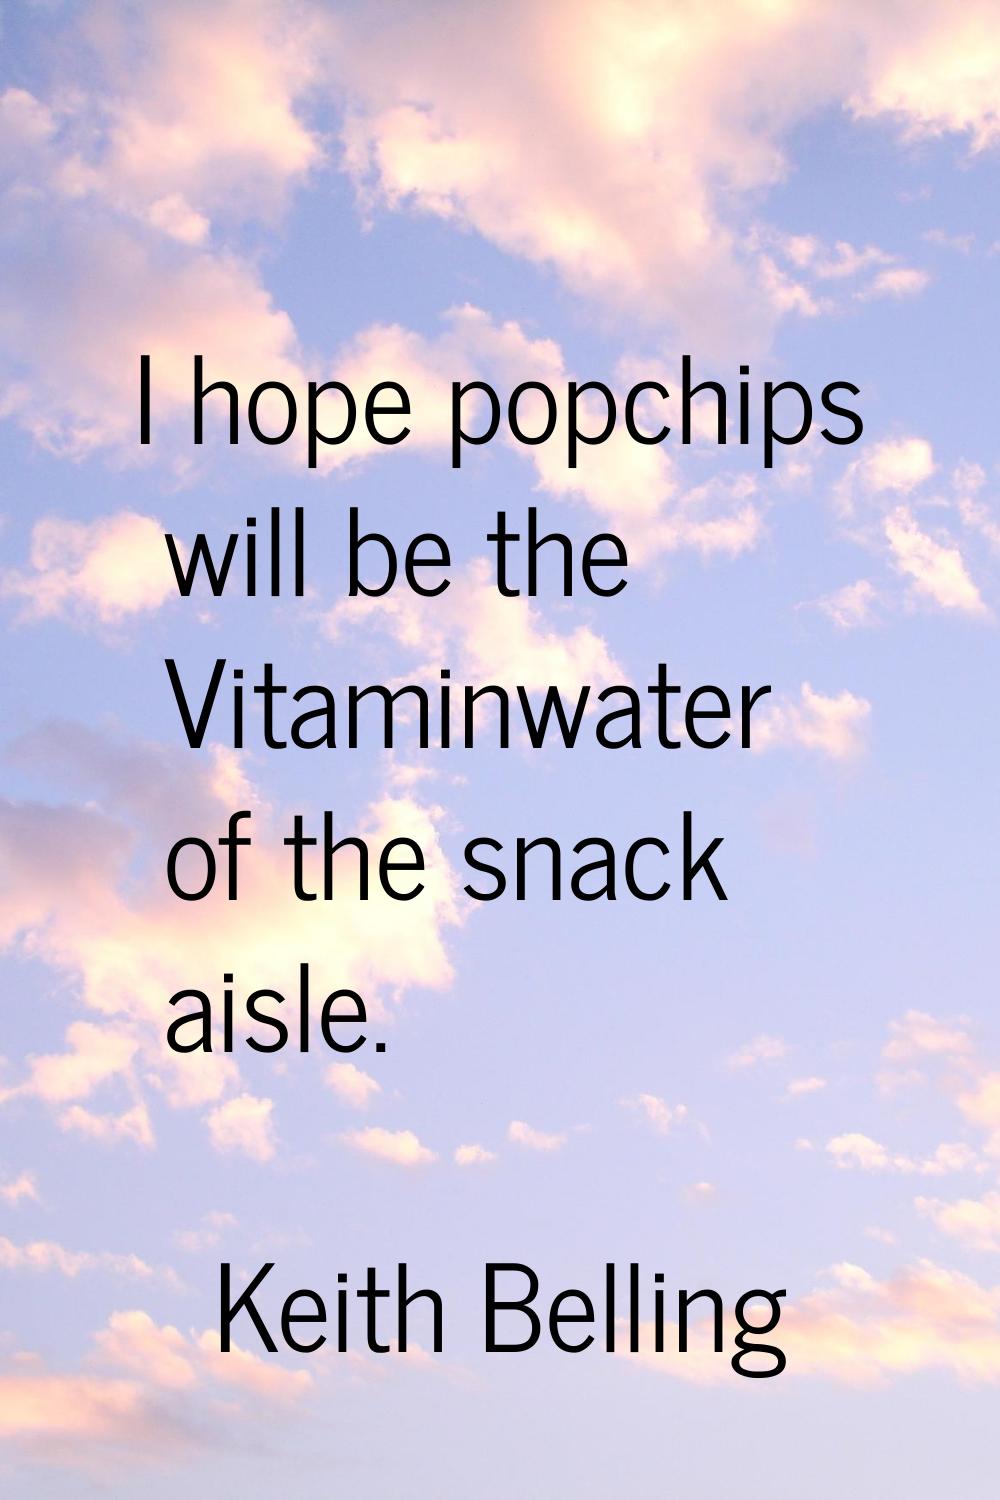 I hope popchips will be the Vitaminwater of the snack aisle.